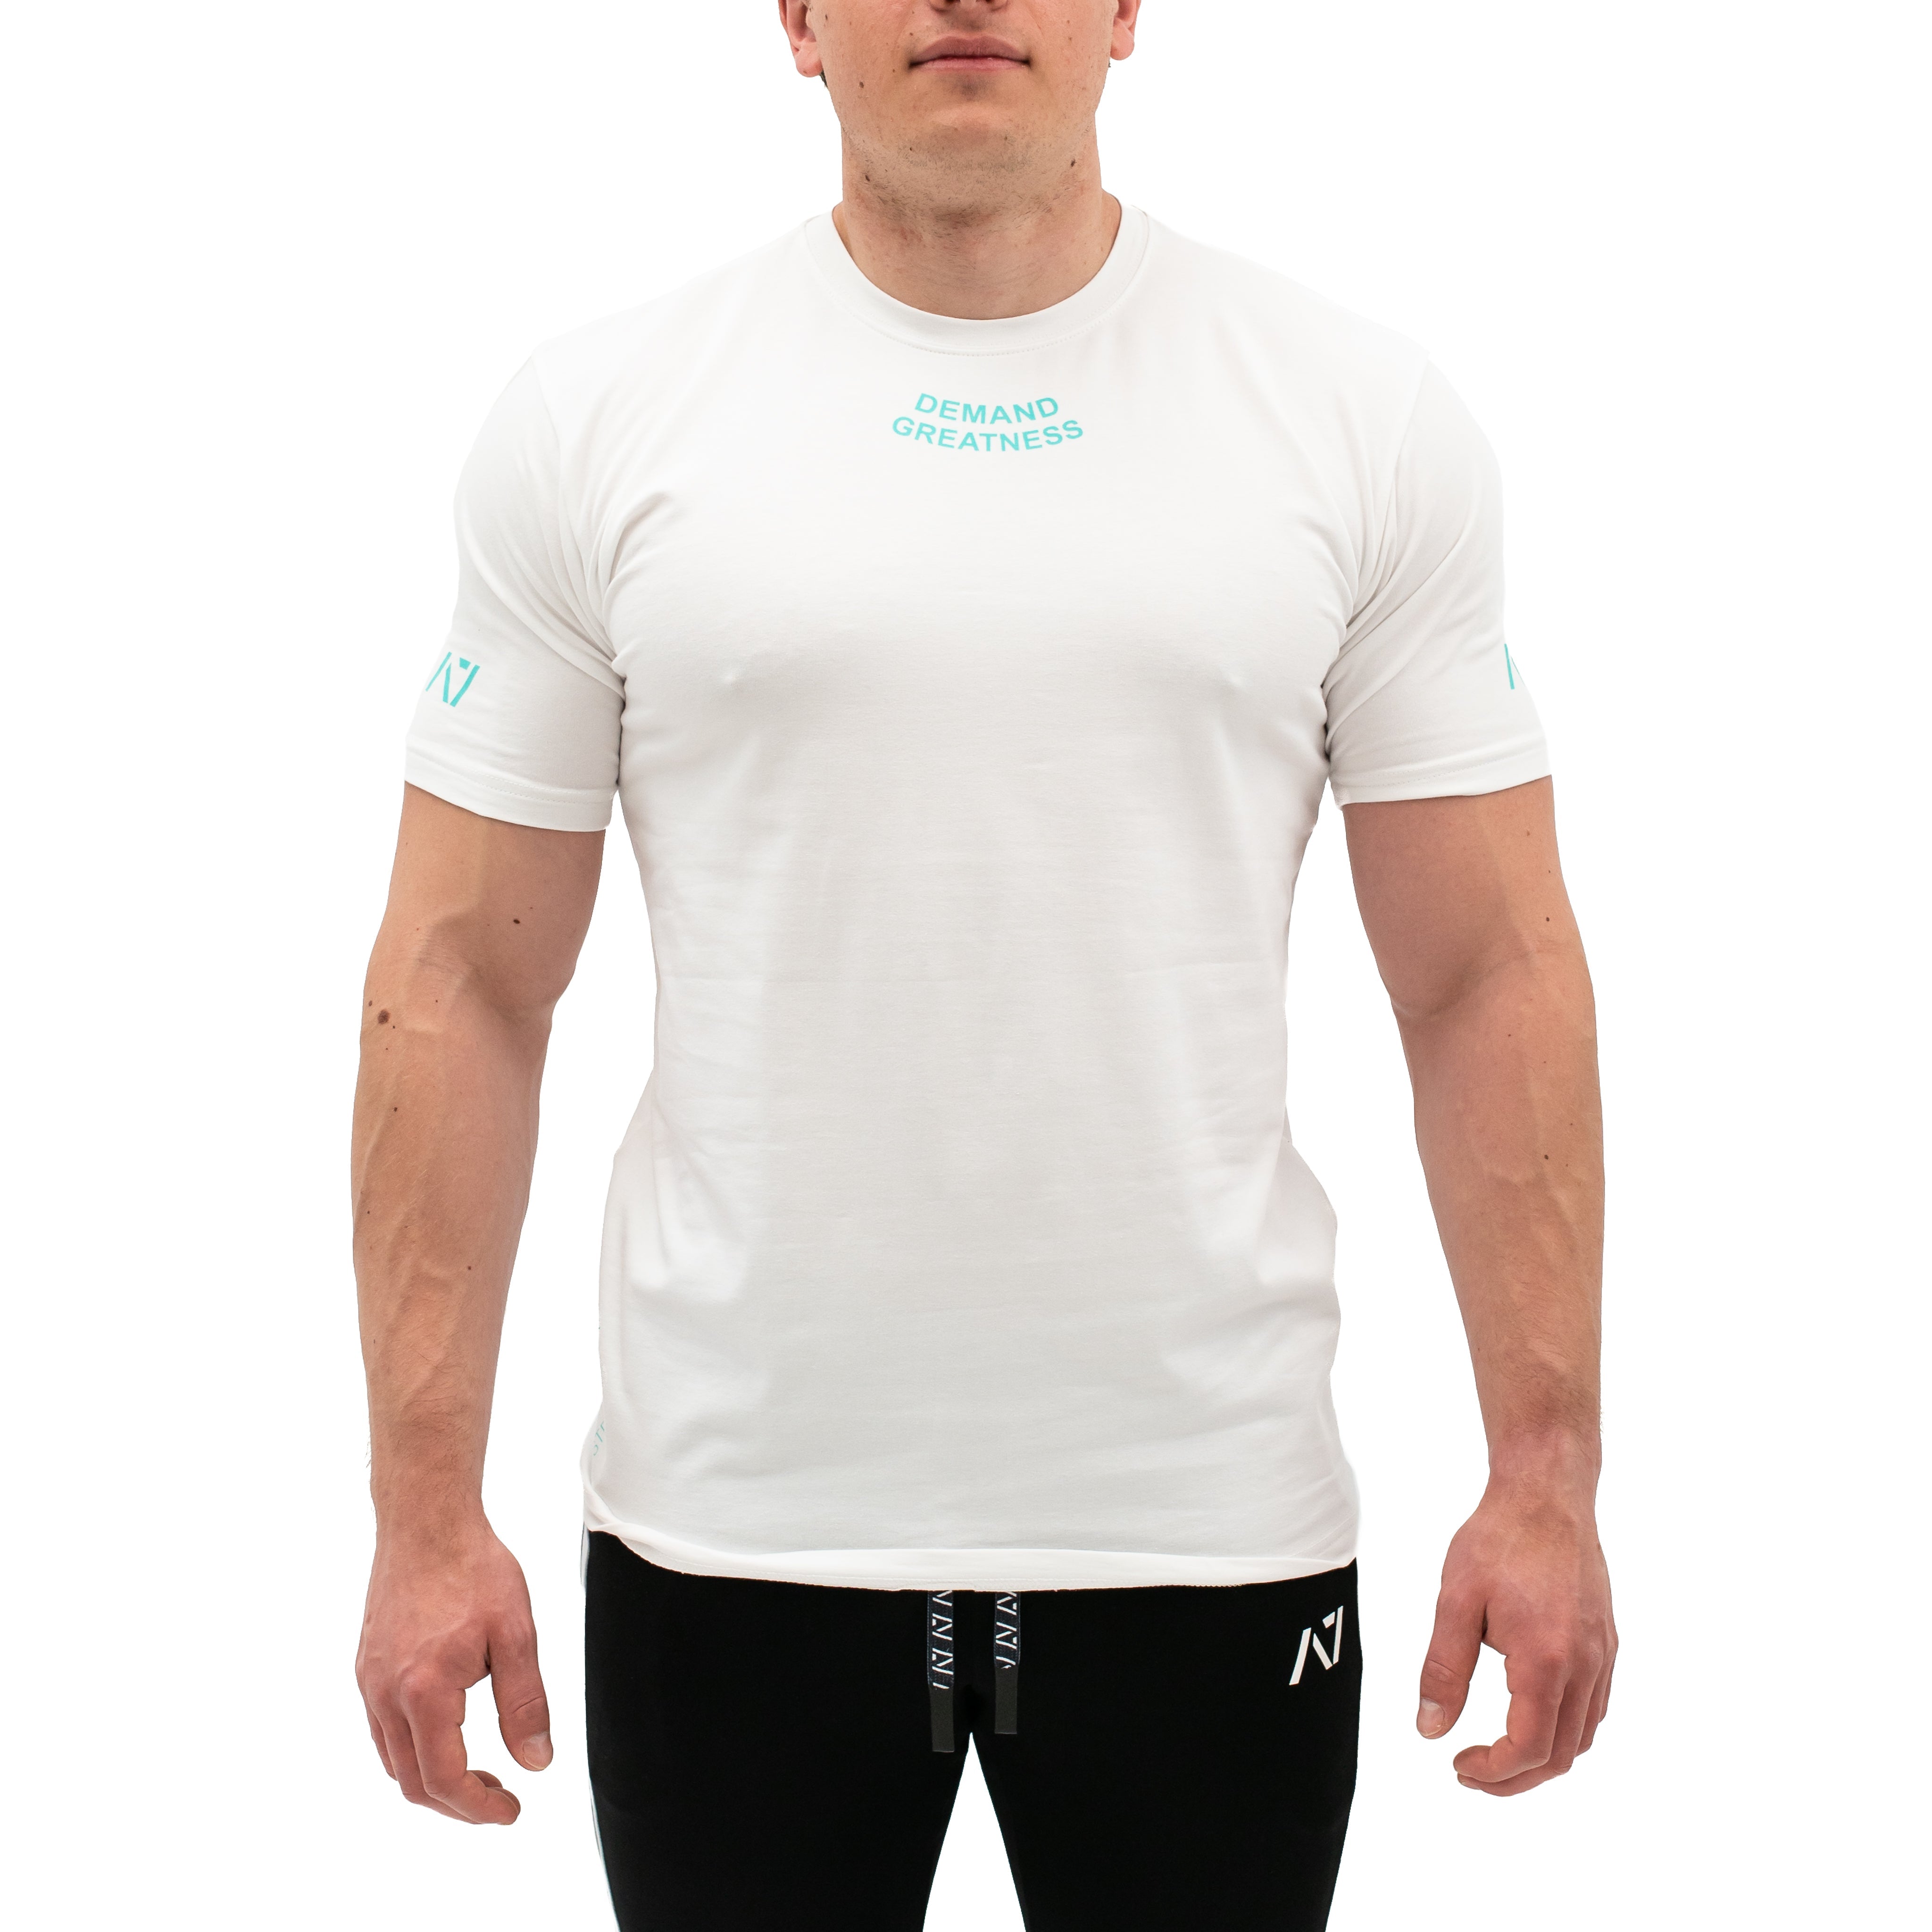 Standout from the crowd in our White Iced Demand Greatness Meet Shirt and let your energy show on the platform, in your training or while out and about. Our Meet tees offer a level of comfort like no other through their unique blend of materials and stretch in the places you desire for a comfortable fit that keeps your mind on your performance. A great addition to your IPF Approved Kit. 